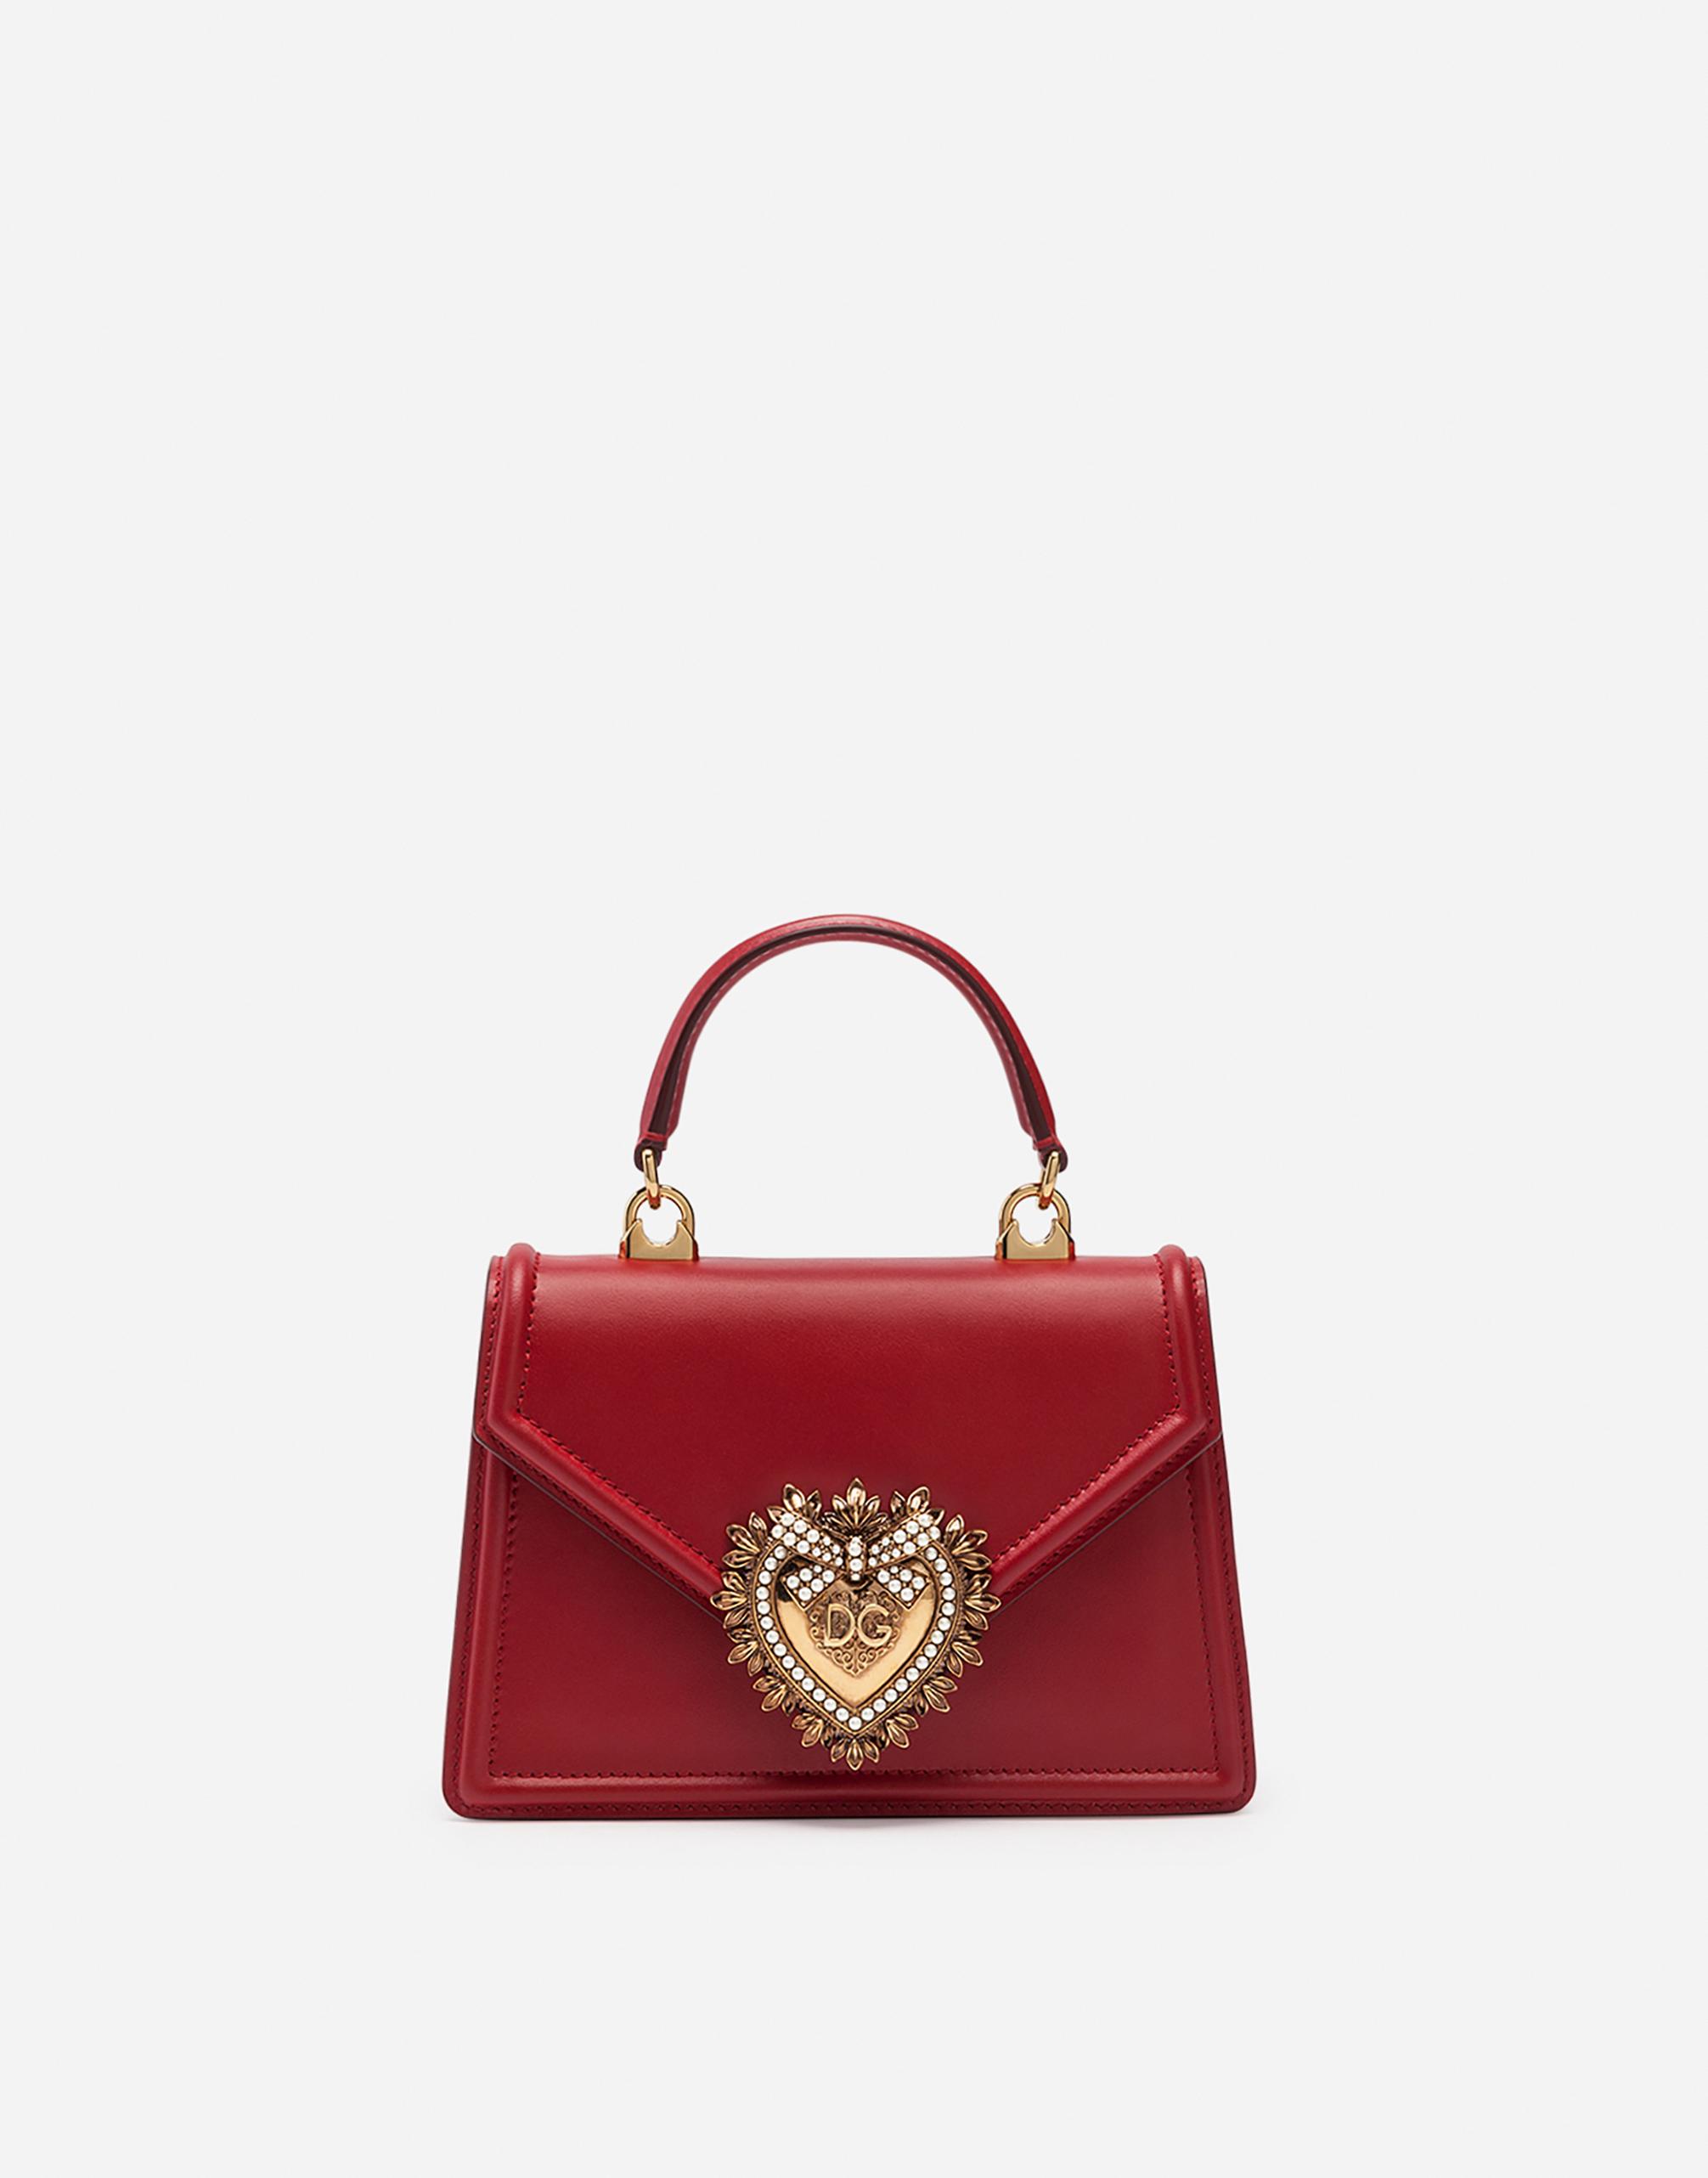 Dolce & Gabbana's Spring 2014 Bags are Exactly What You'd Expect, but in a  Good Way - PurseBlog